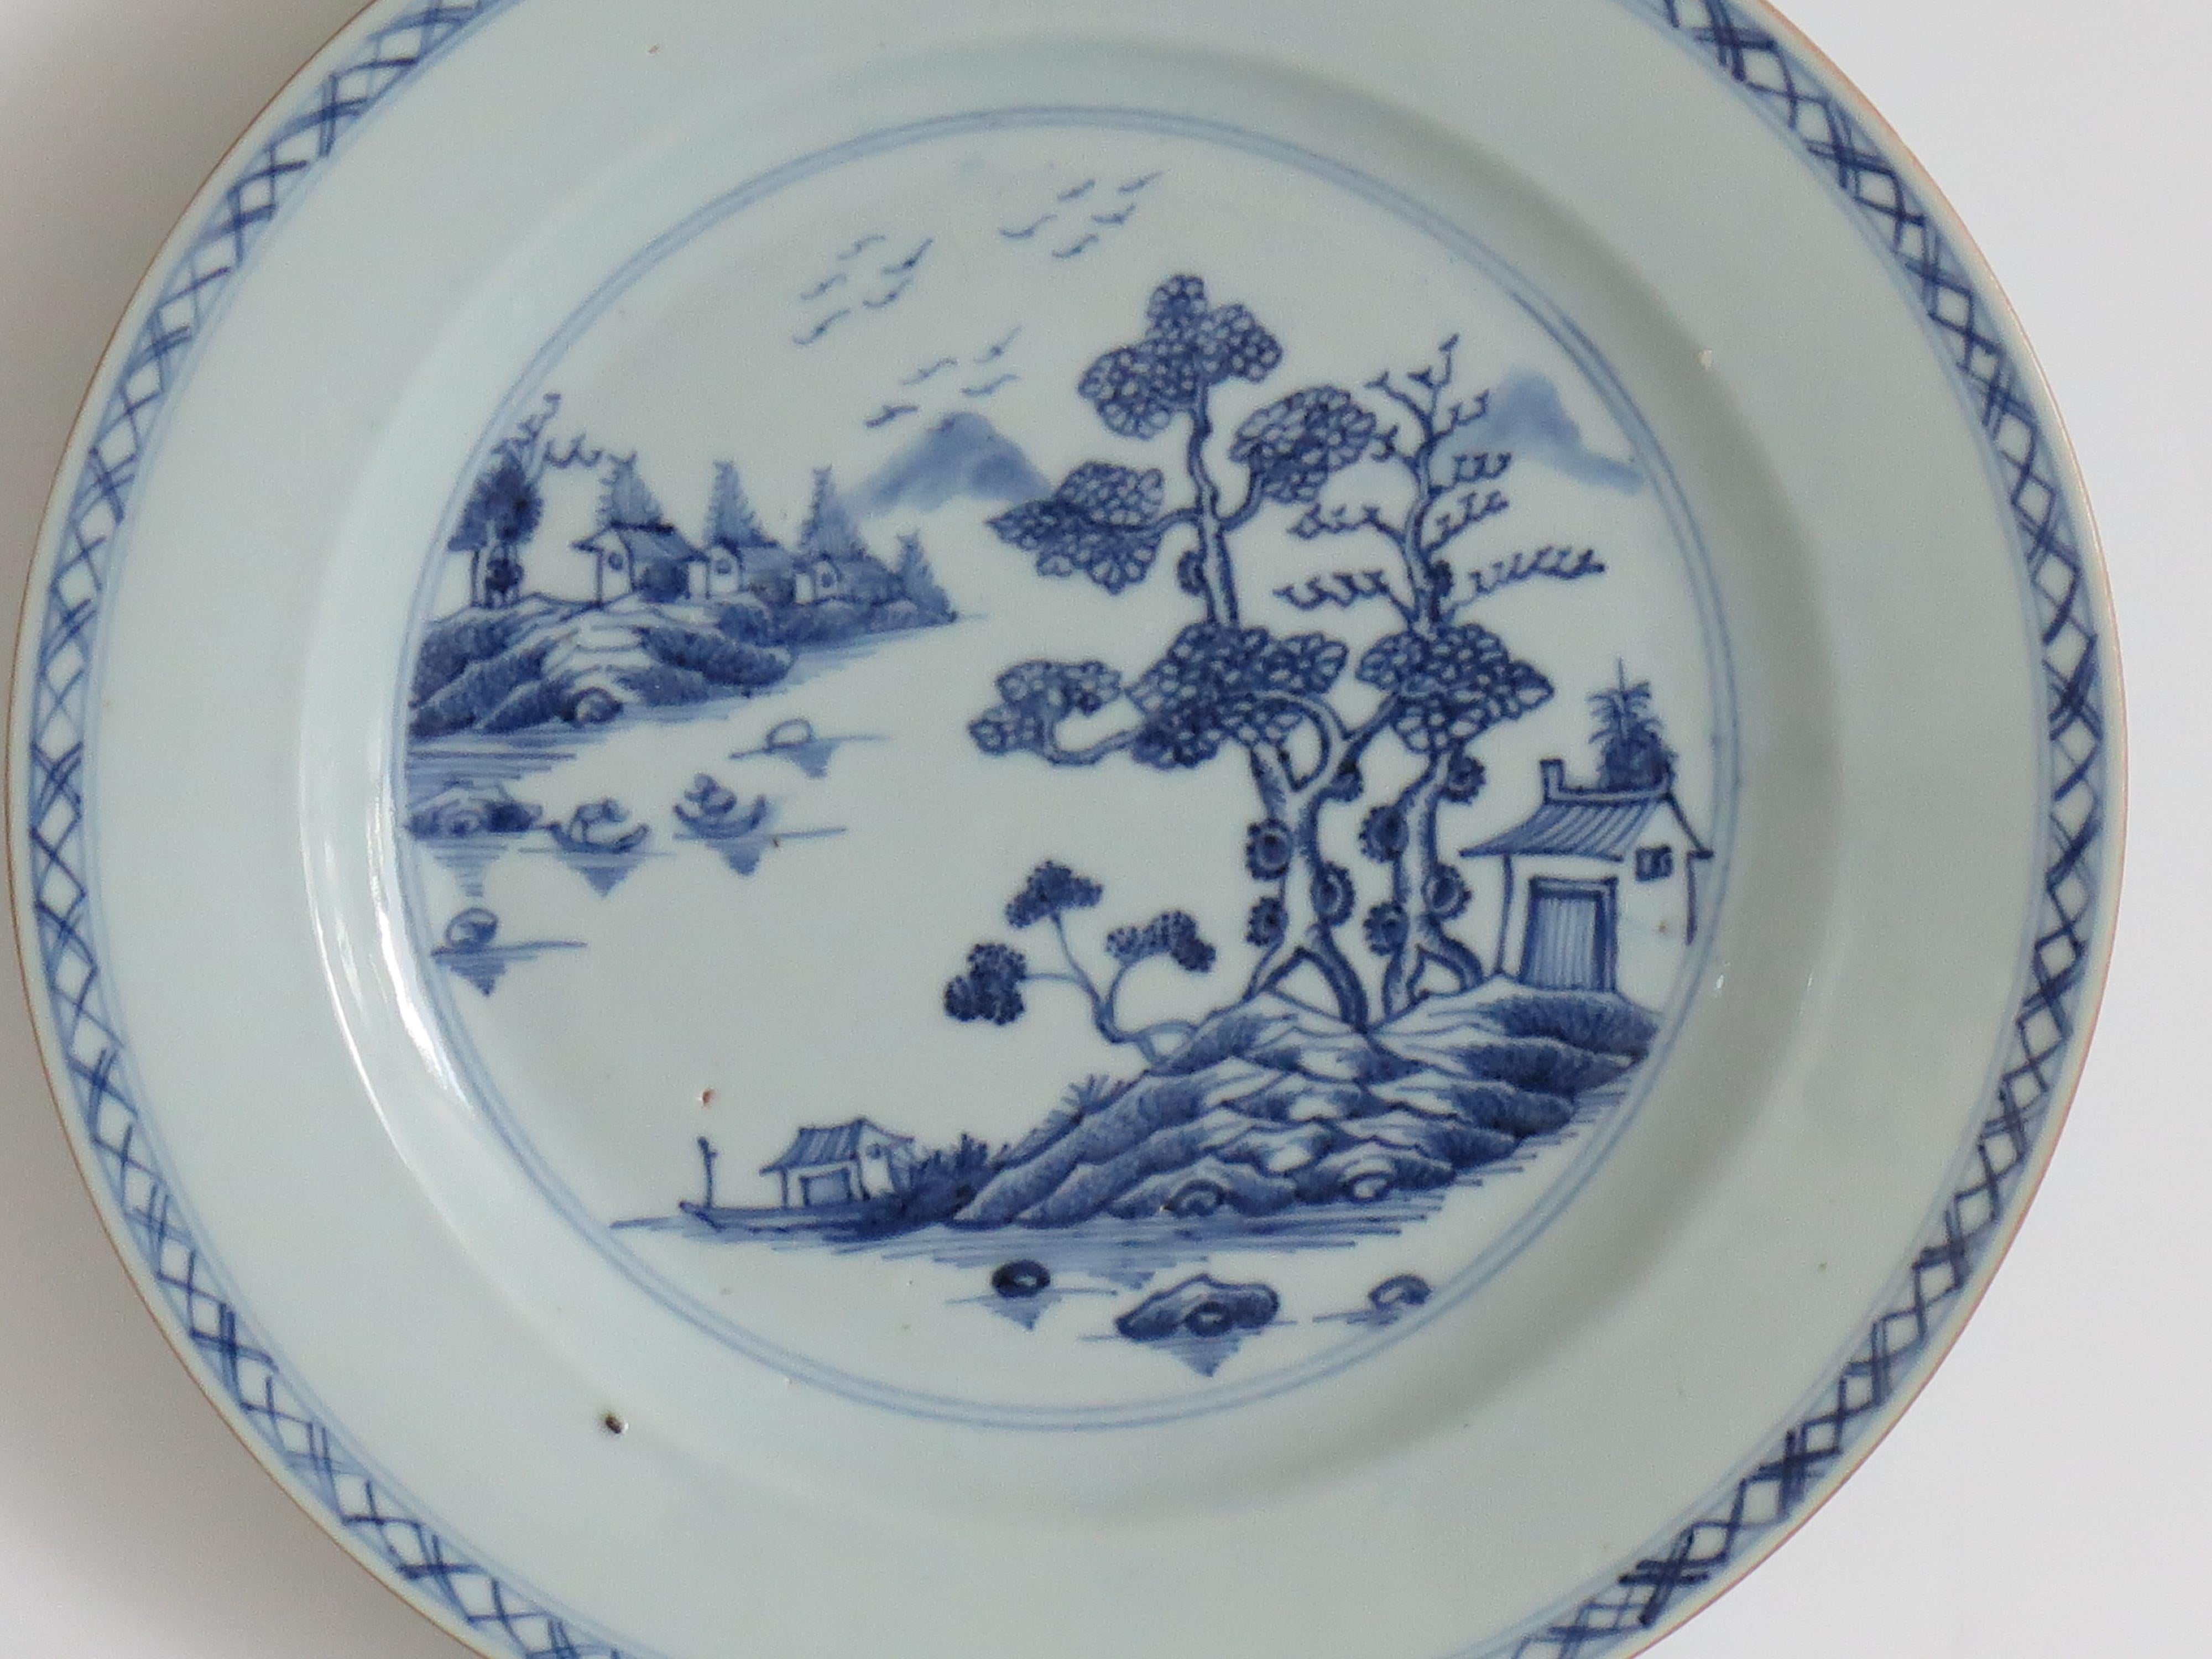 This is a very good condition hand-painted Chinese Export porcelain plate, in a typical hand painted pattern and dating to the second half of the 18th Century, Qing Qianlong period, circa 1770.

The plate is well potted with a lovely glassy light